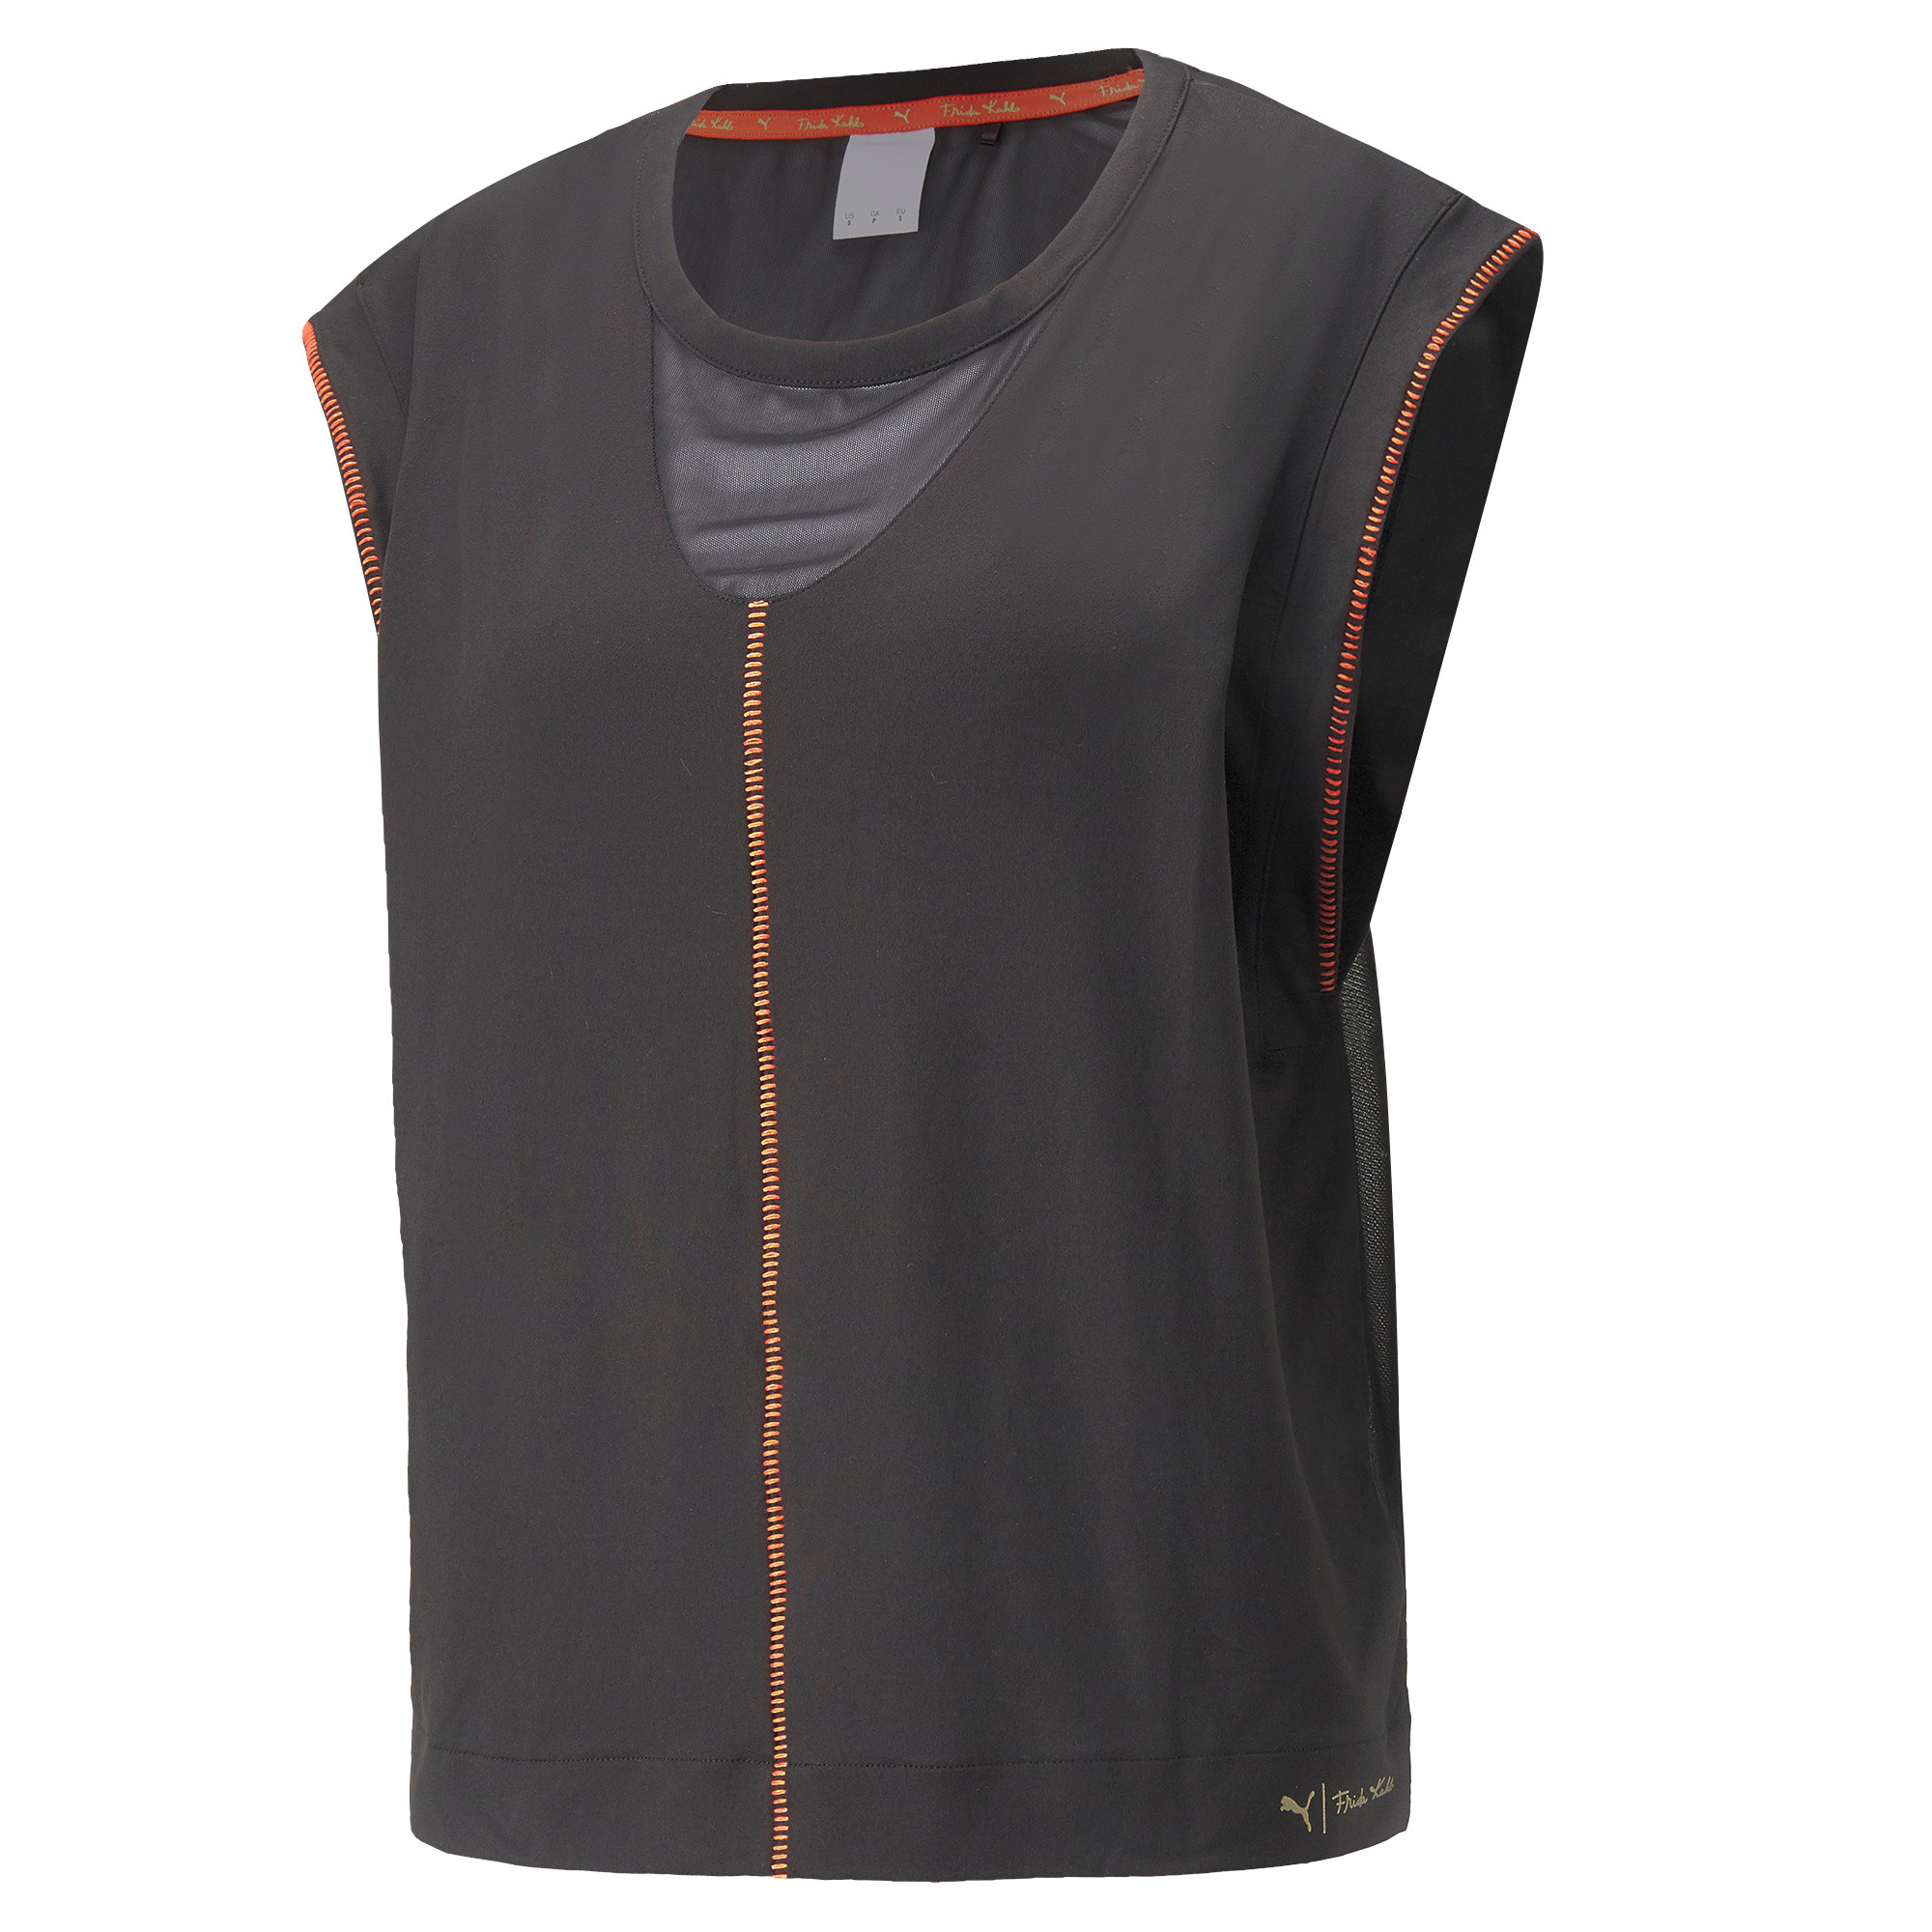 Training Tee in drycell, Black, large image number 0